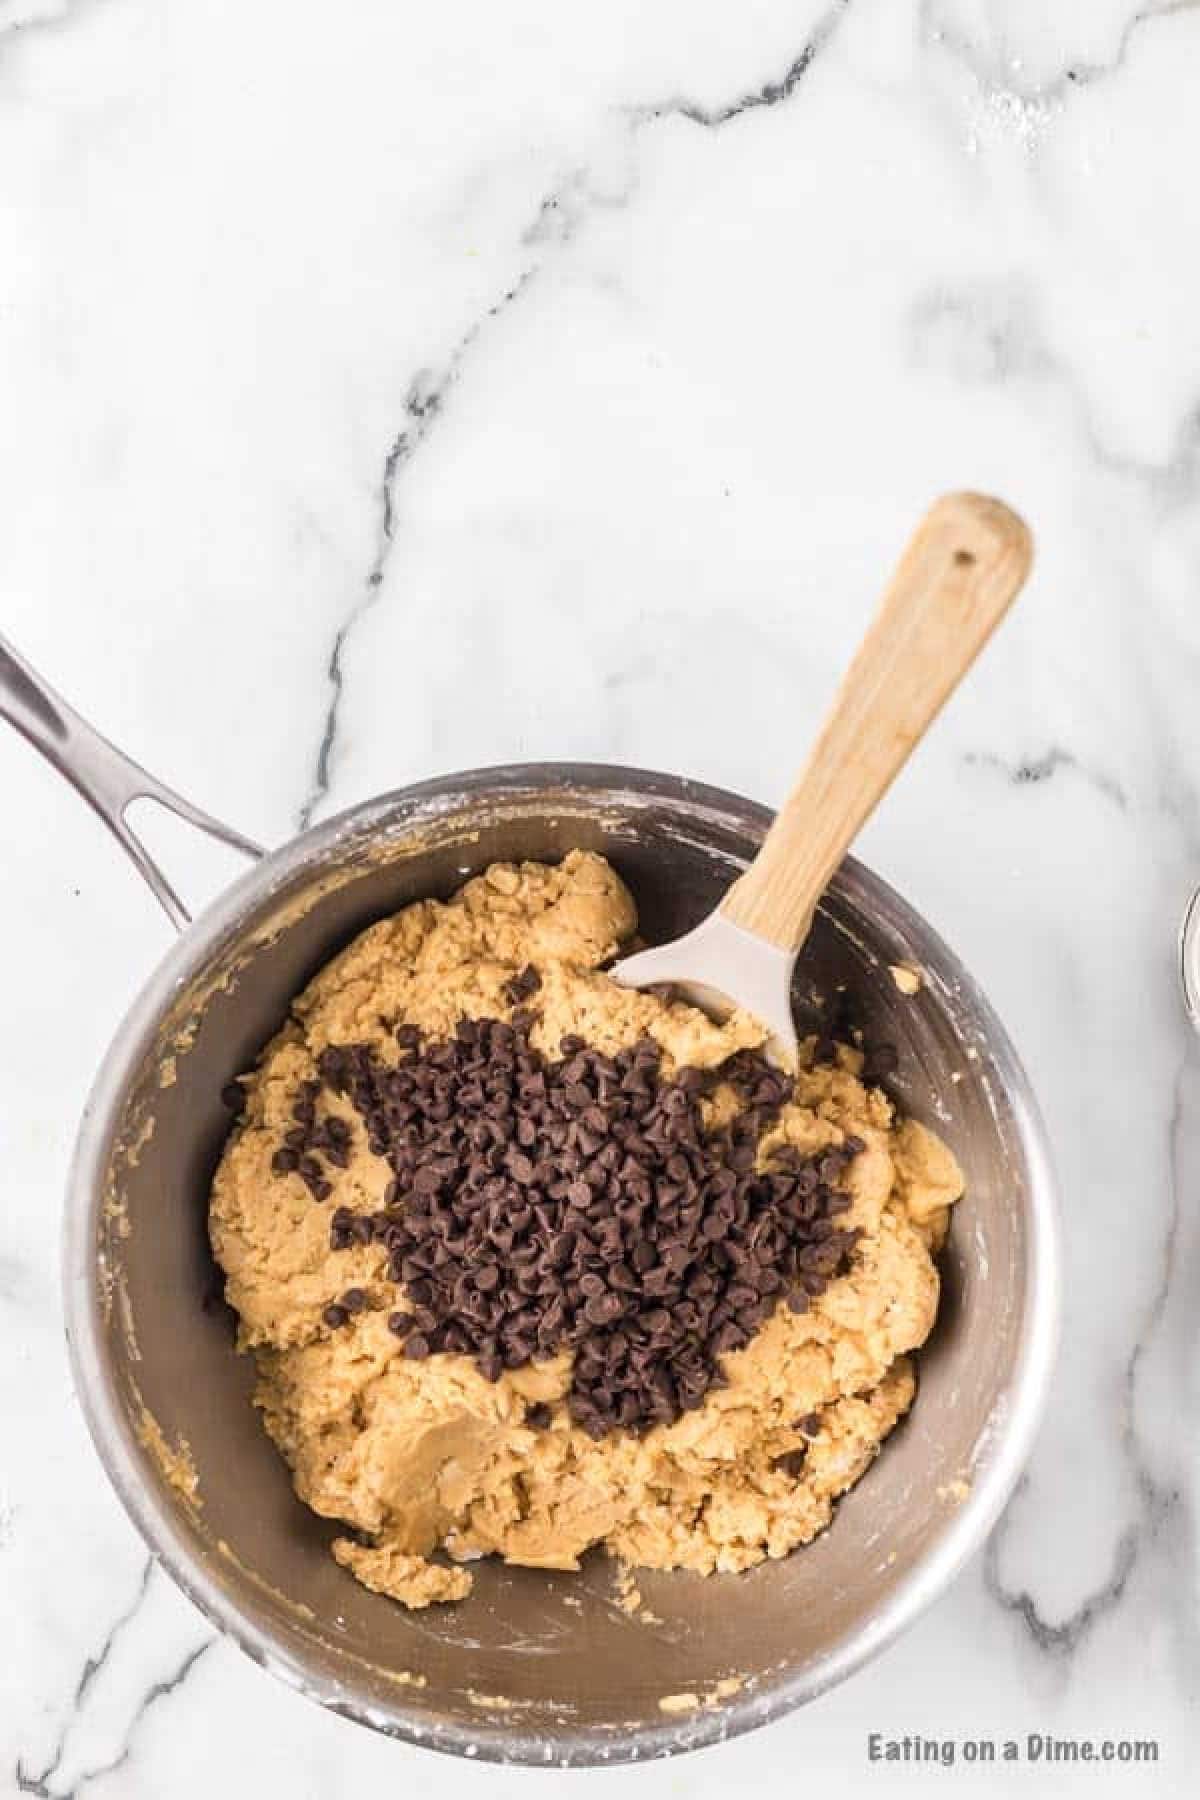 Peanut butter mixture in a saucepan topped with chocolate chips with a wooden spoon